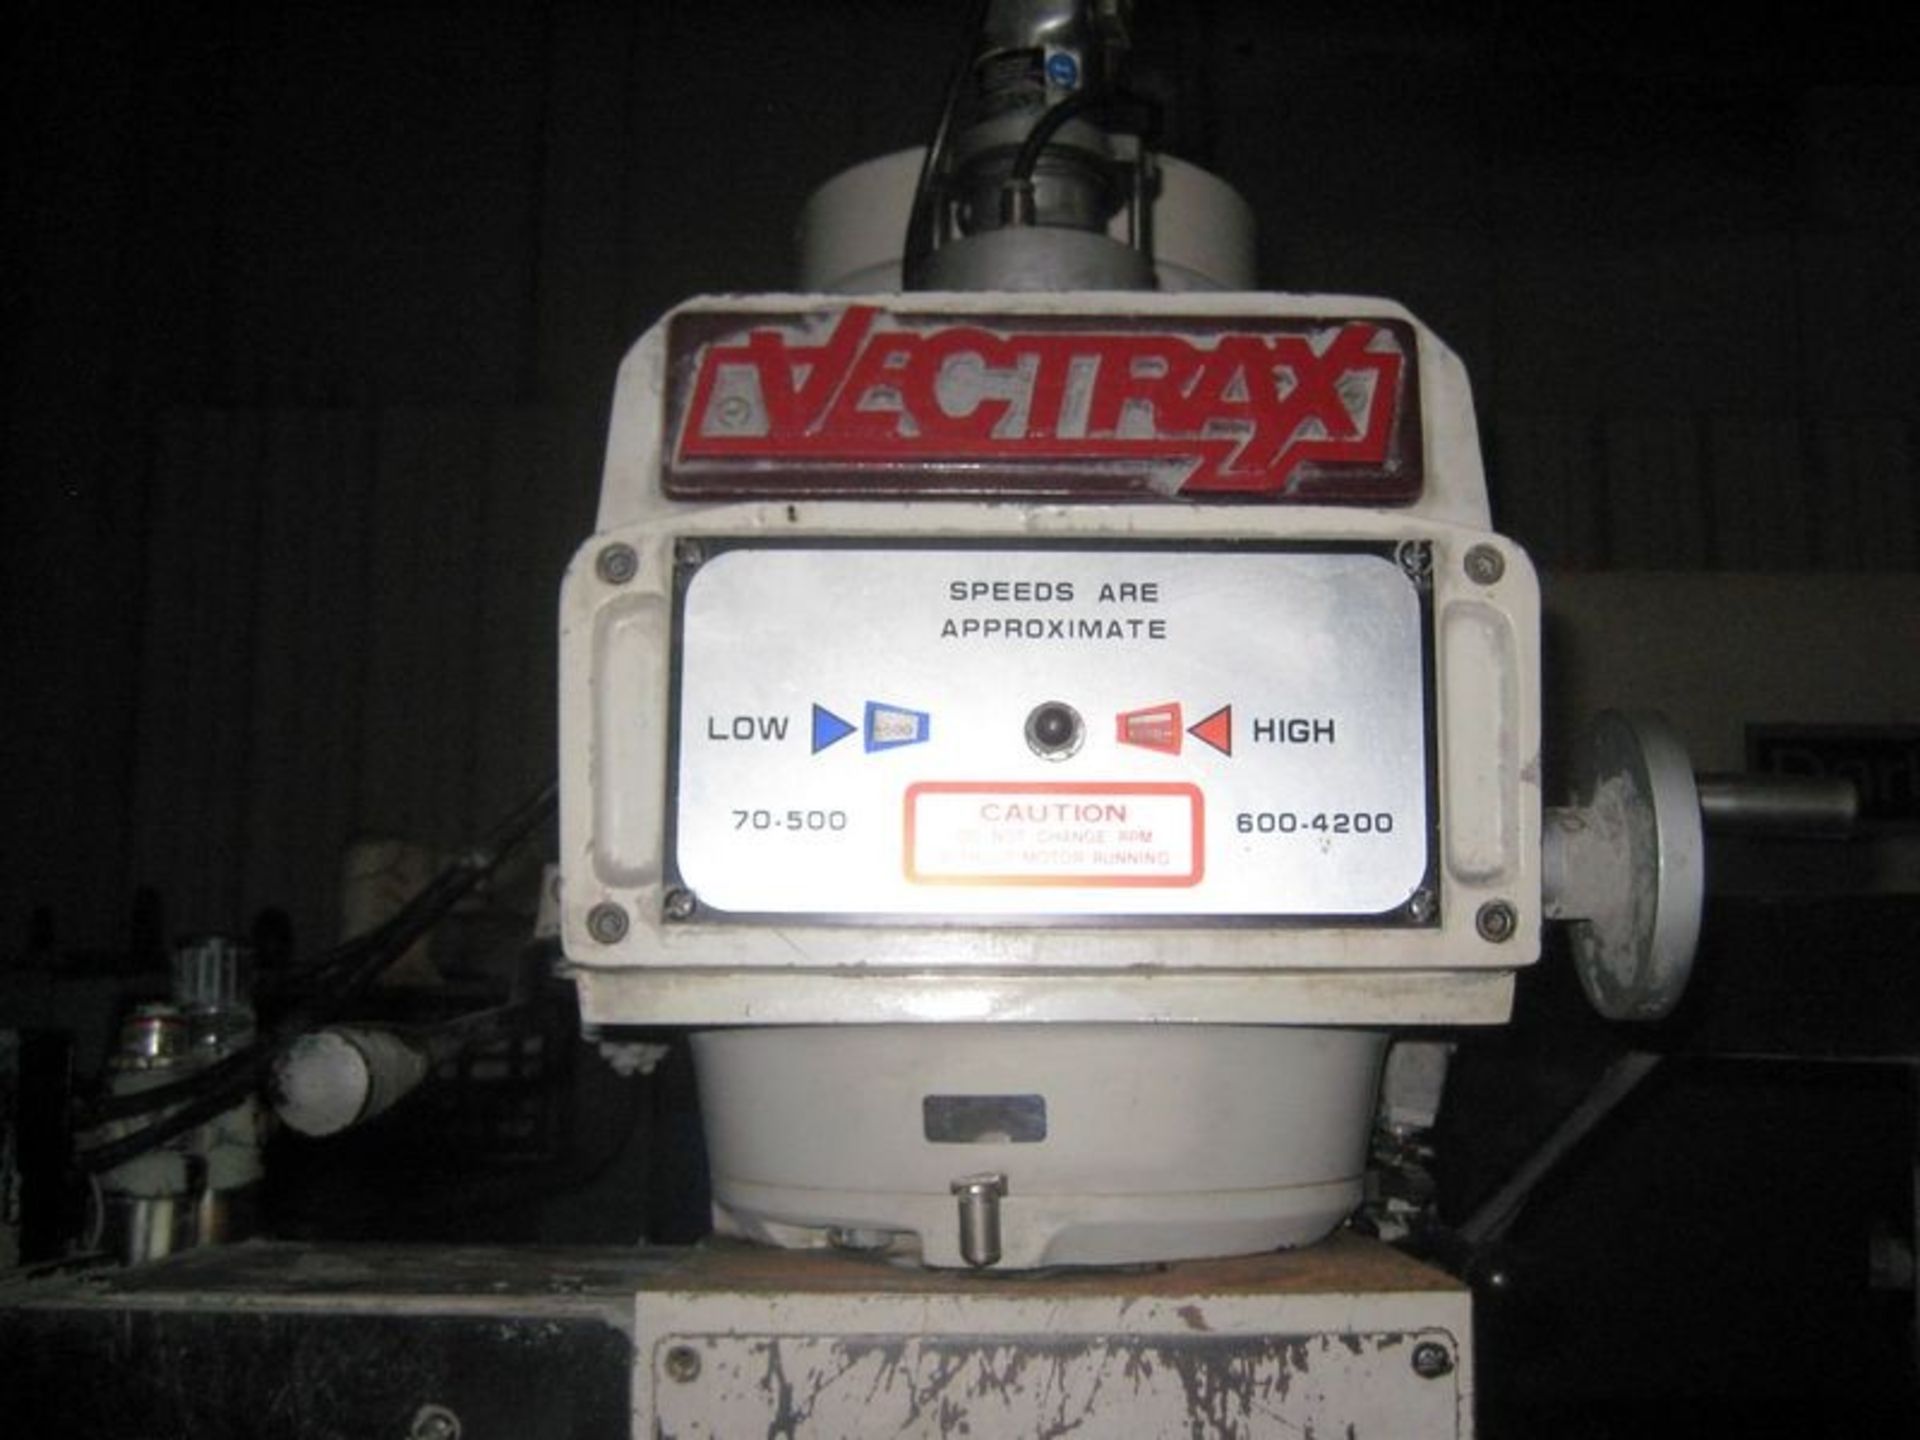 Vectrax Model GS-N16V 3-Axis CNC Knee Type Milling Machine, S/N 9030192NV, New 2001 General - Image 3 of 5